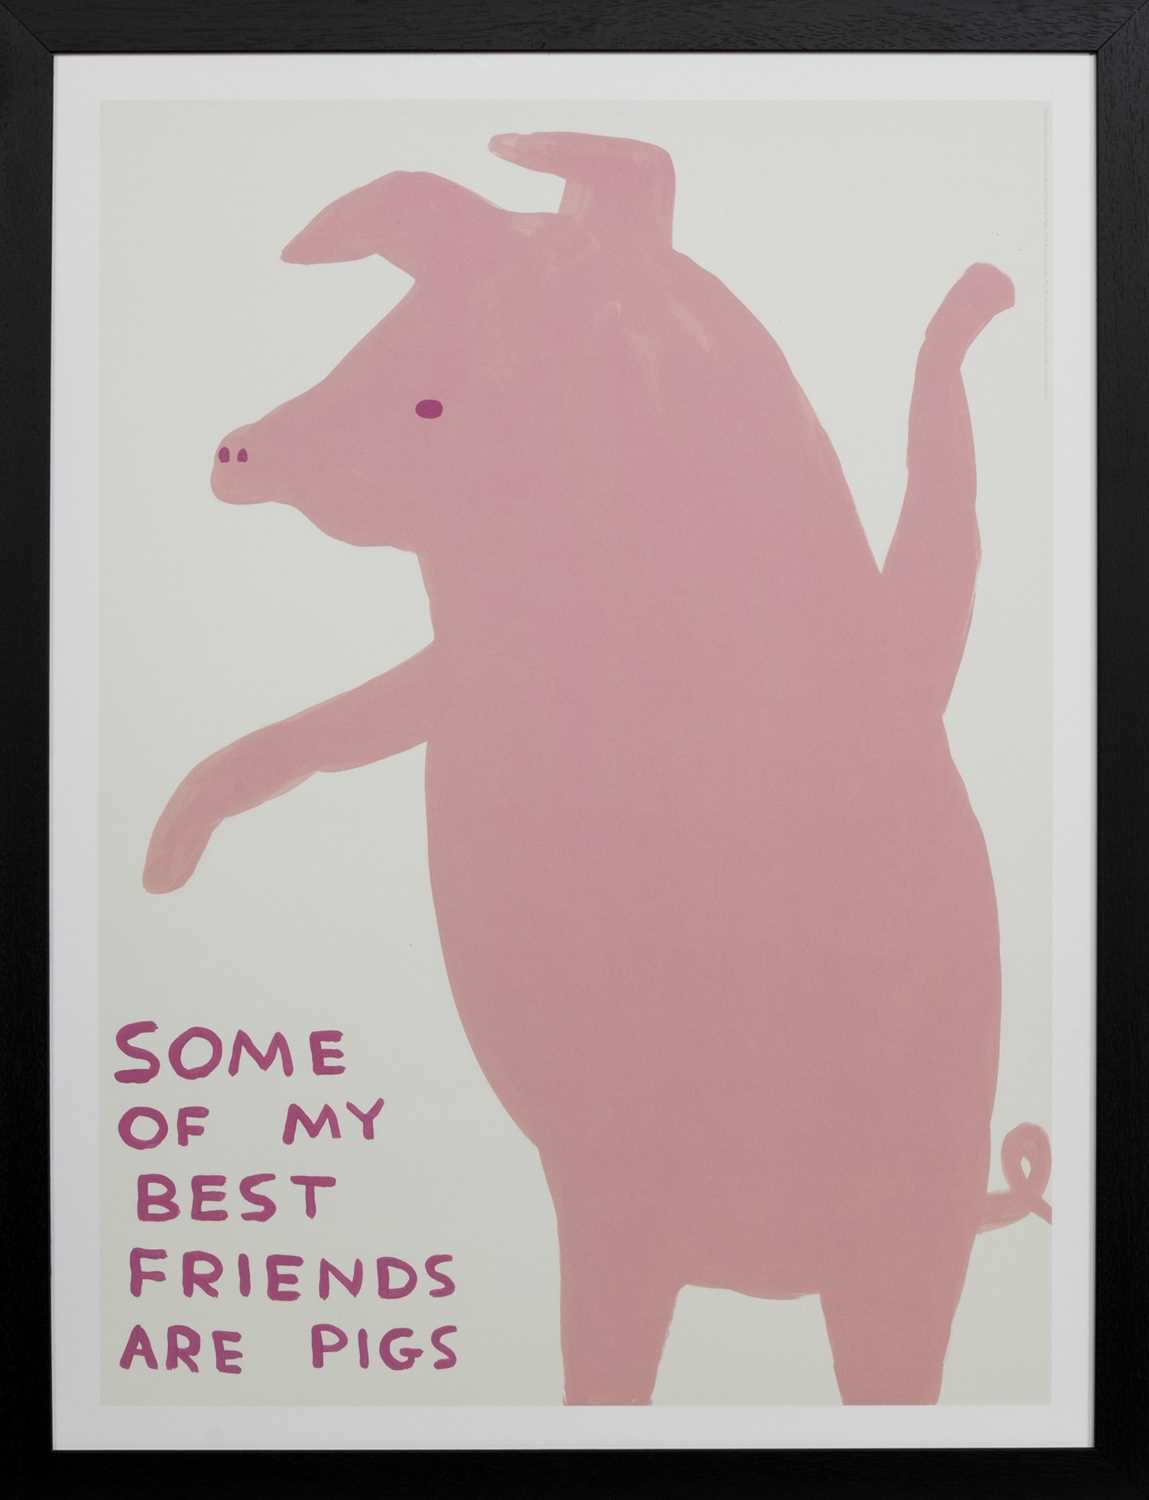 Lot 140 - SOME OF MY BEST FRIENDS AER PIGS, A LITHOGRAPH BY DAVID SHRIGLEY